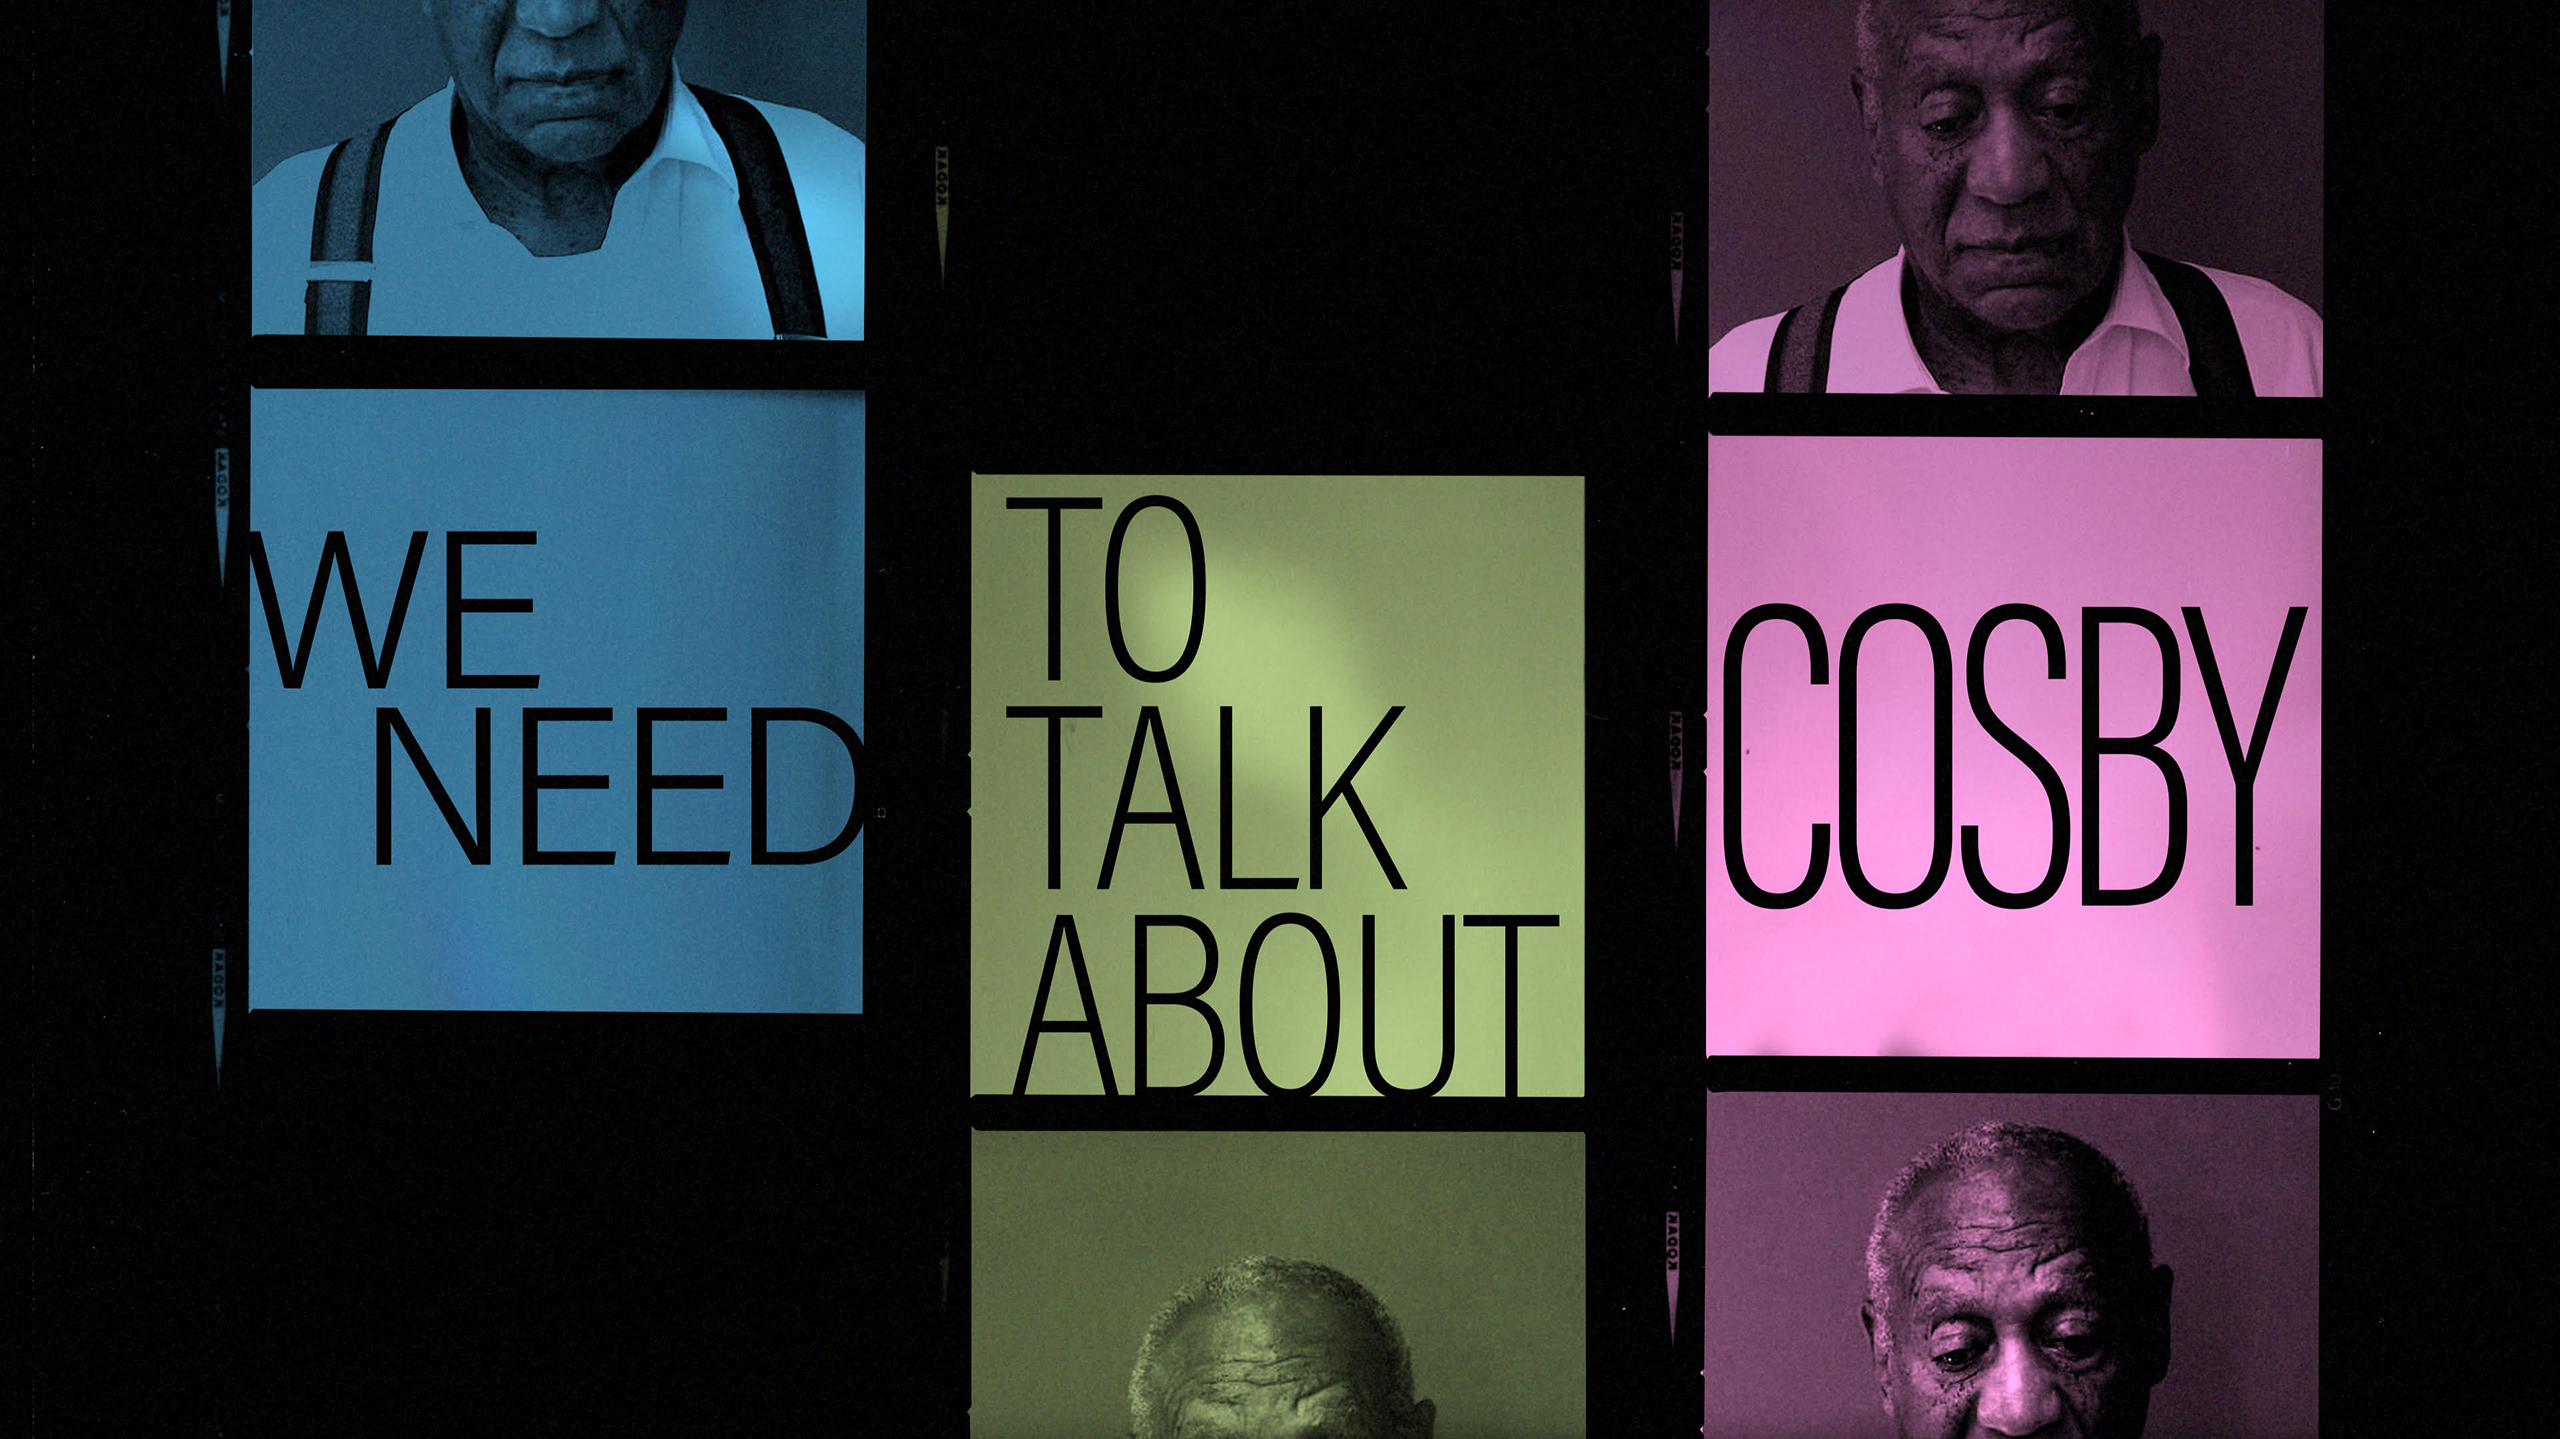 [Sundance '22] 'We Need to Talk About Cosby' review: Kumau Bell offers an intense look on a difficult topic